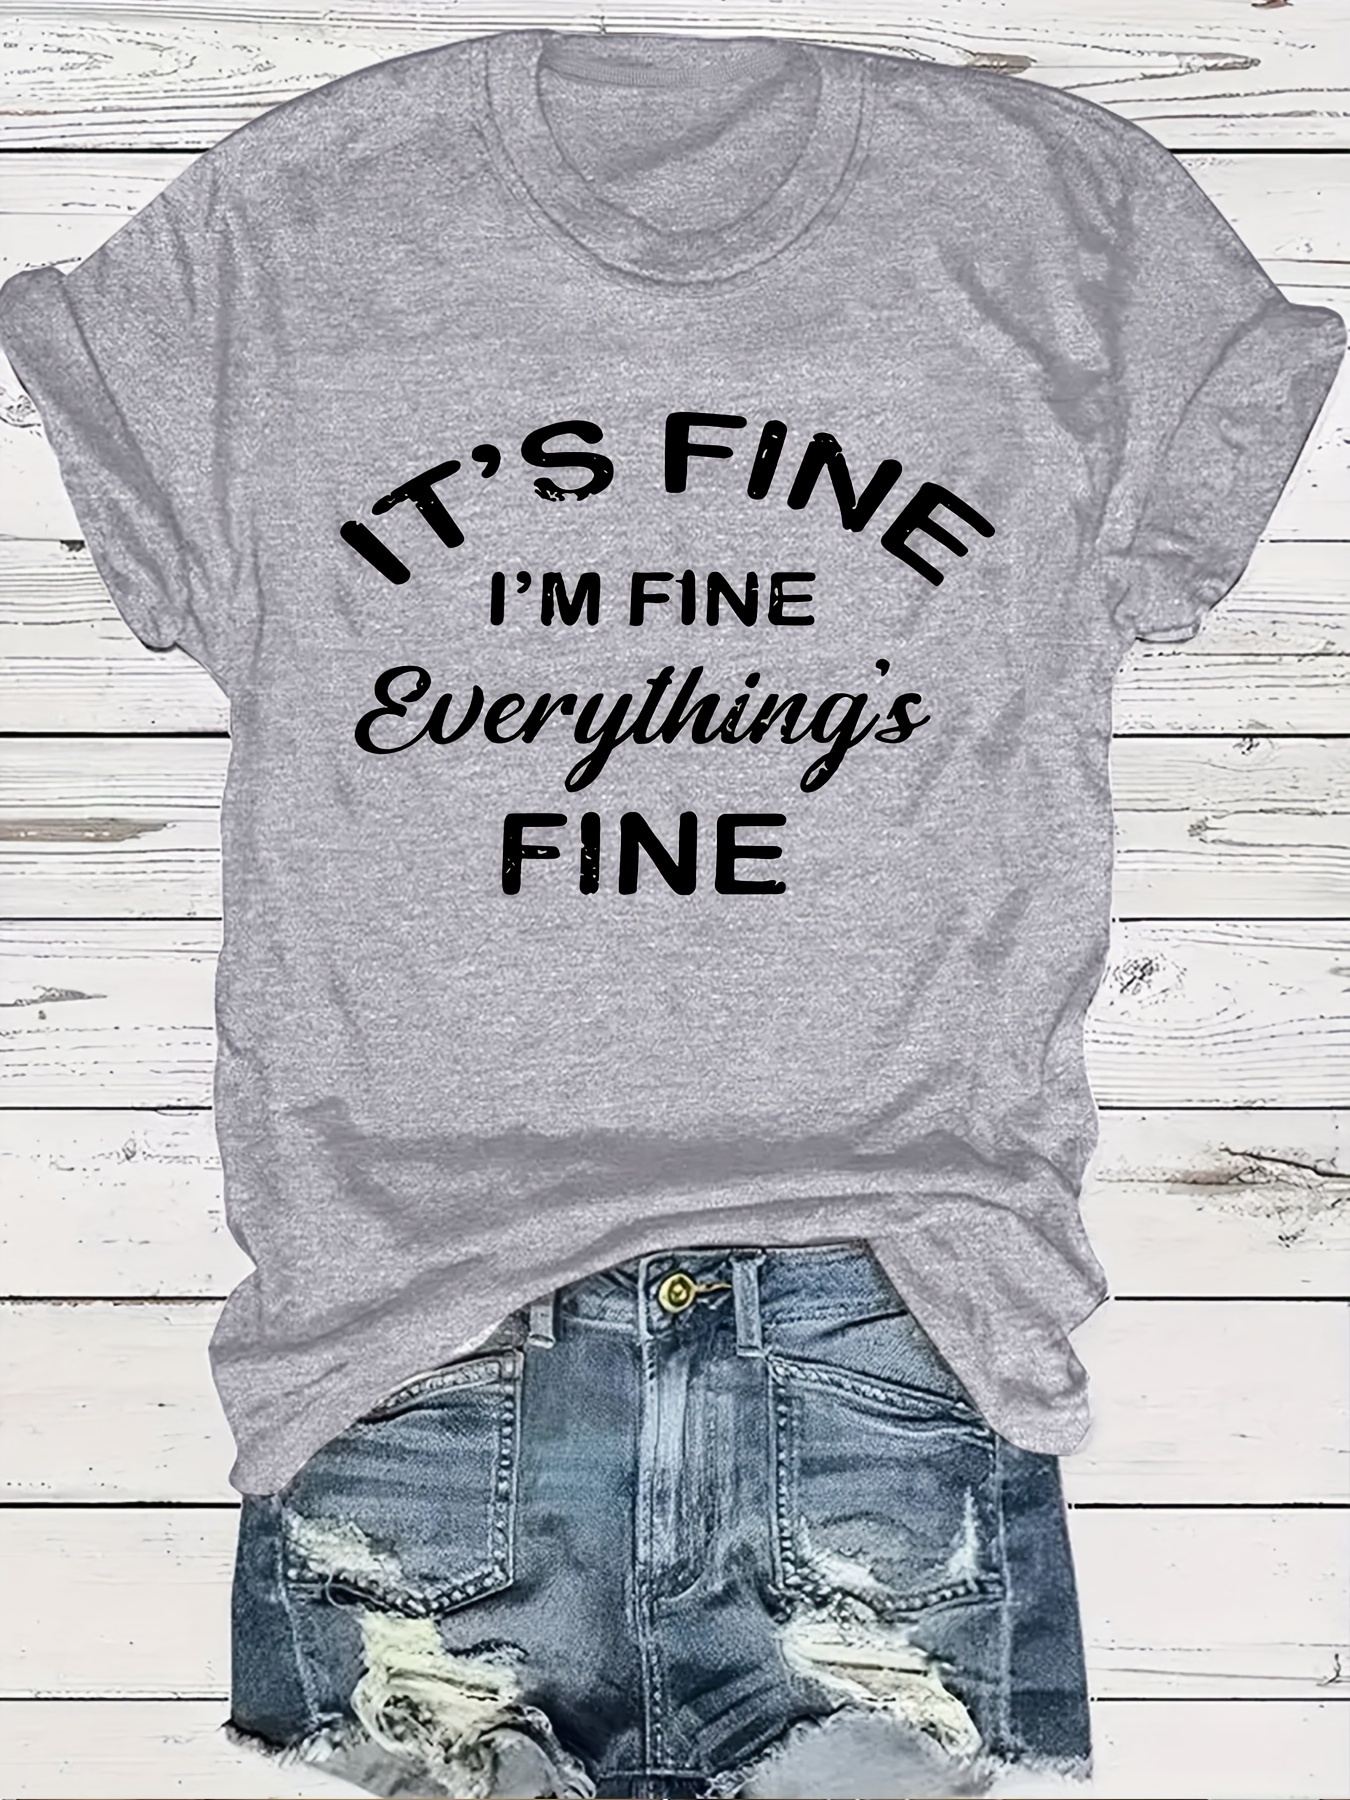 plus size its fine letter print t shirt short sleeve crew neck casual top for summer spring womens plus size clothing